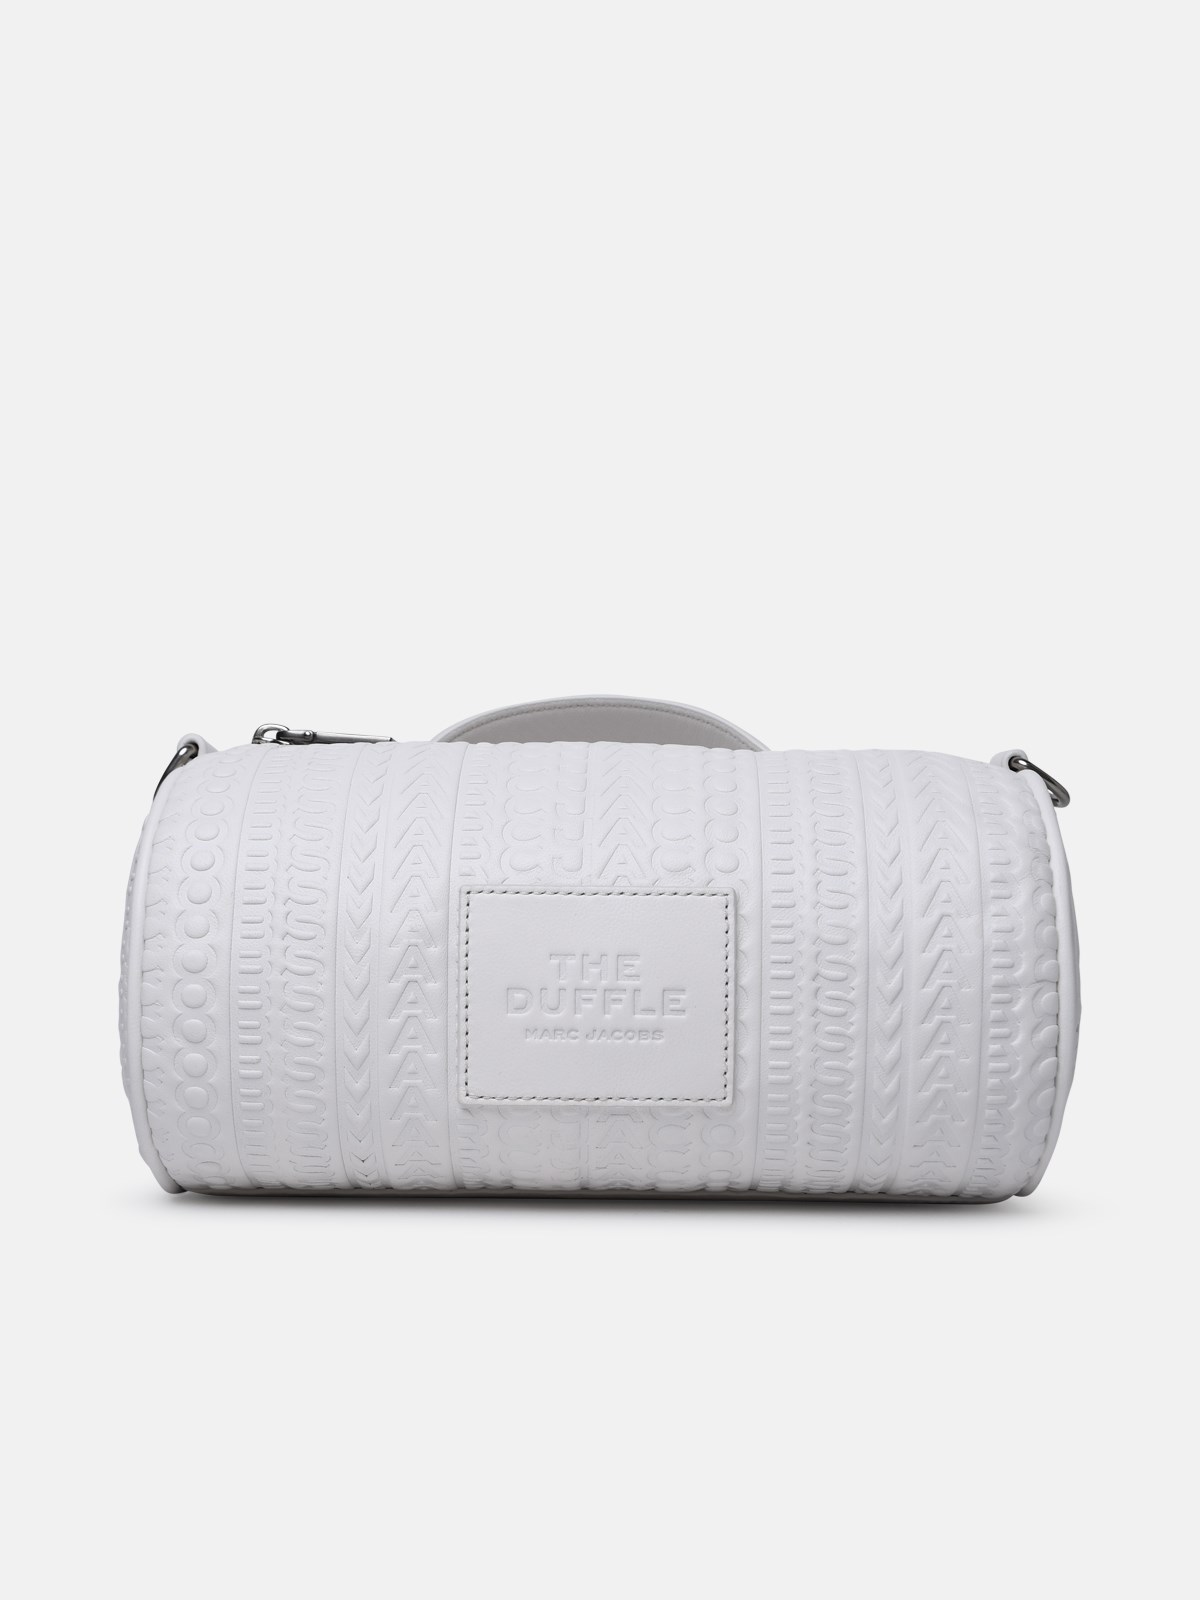 Marc Jacobs (the) 'duffle' White Leather Bag